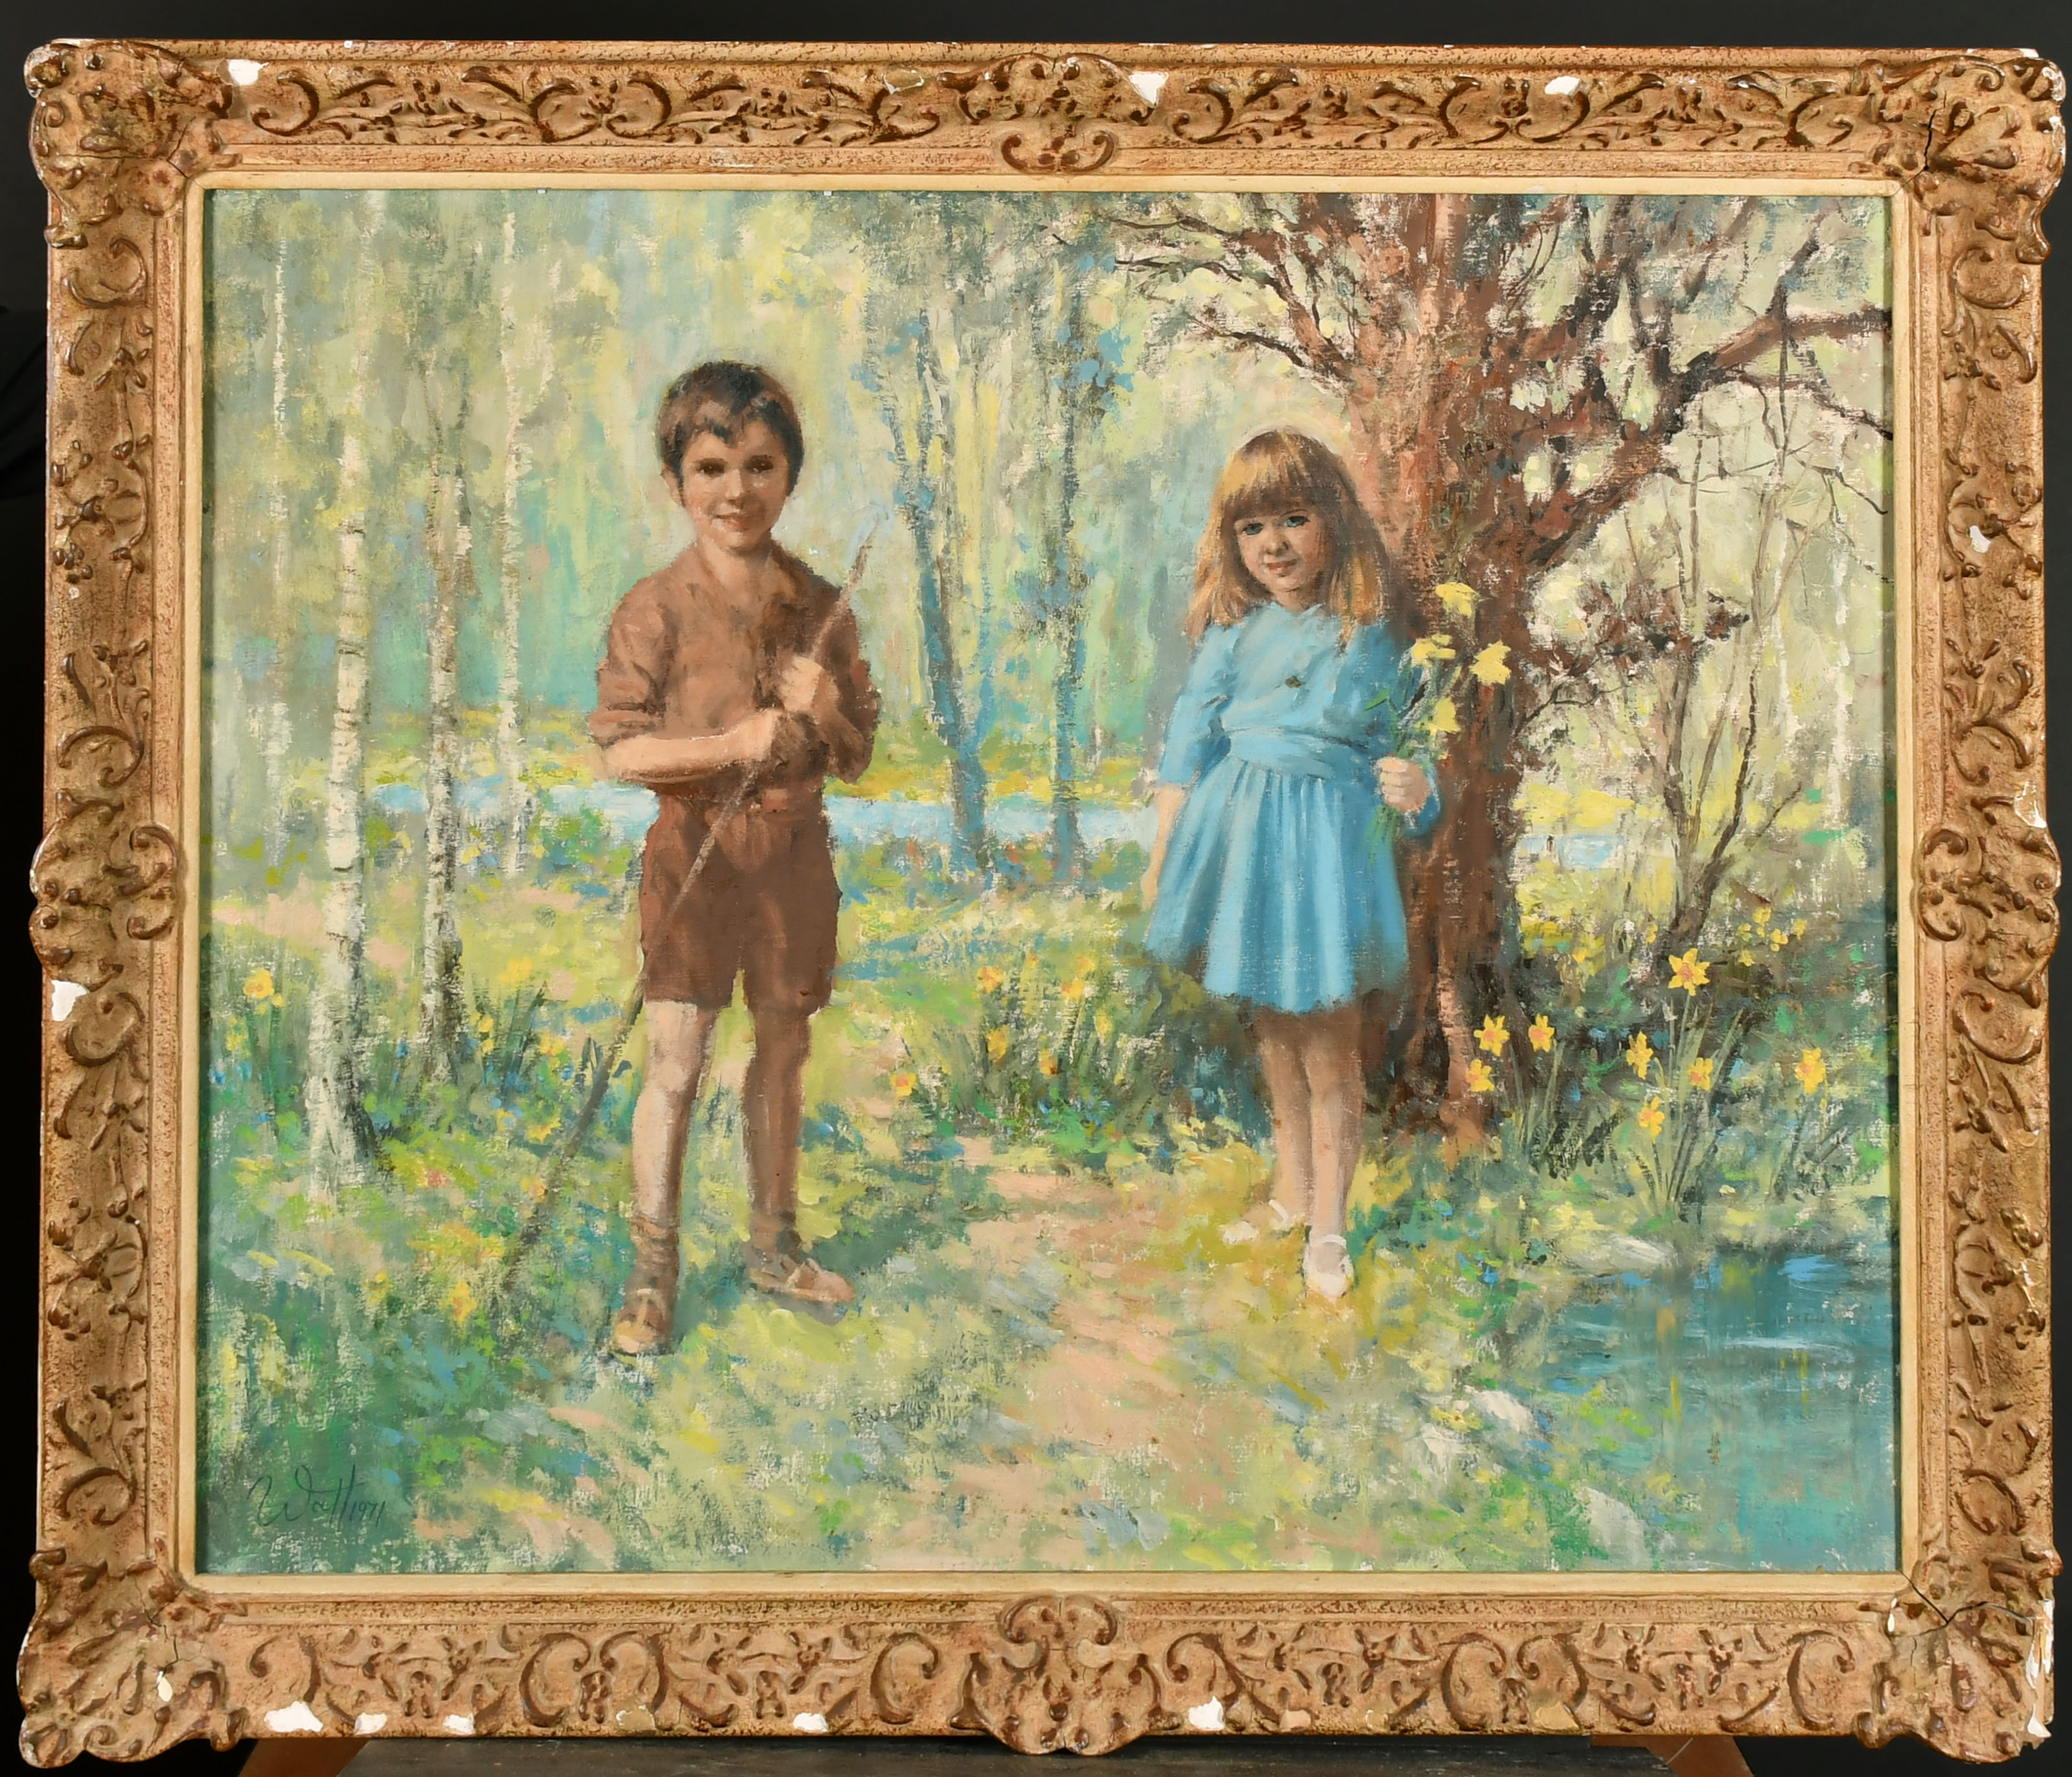 Watt (20th Century) British. Two Children in a Garden, Oil on board, Signed and dated 1971, 25" x - Image 2 of 5